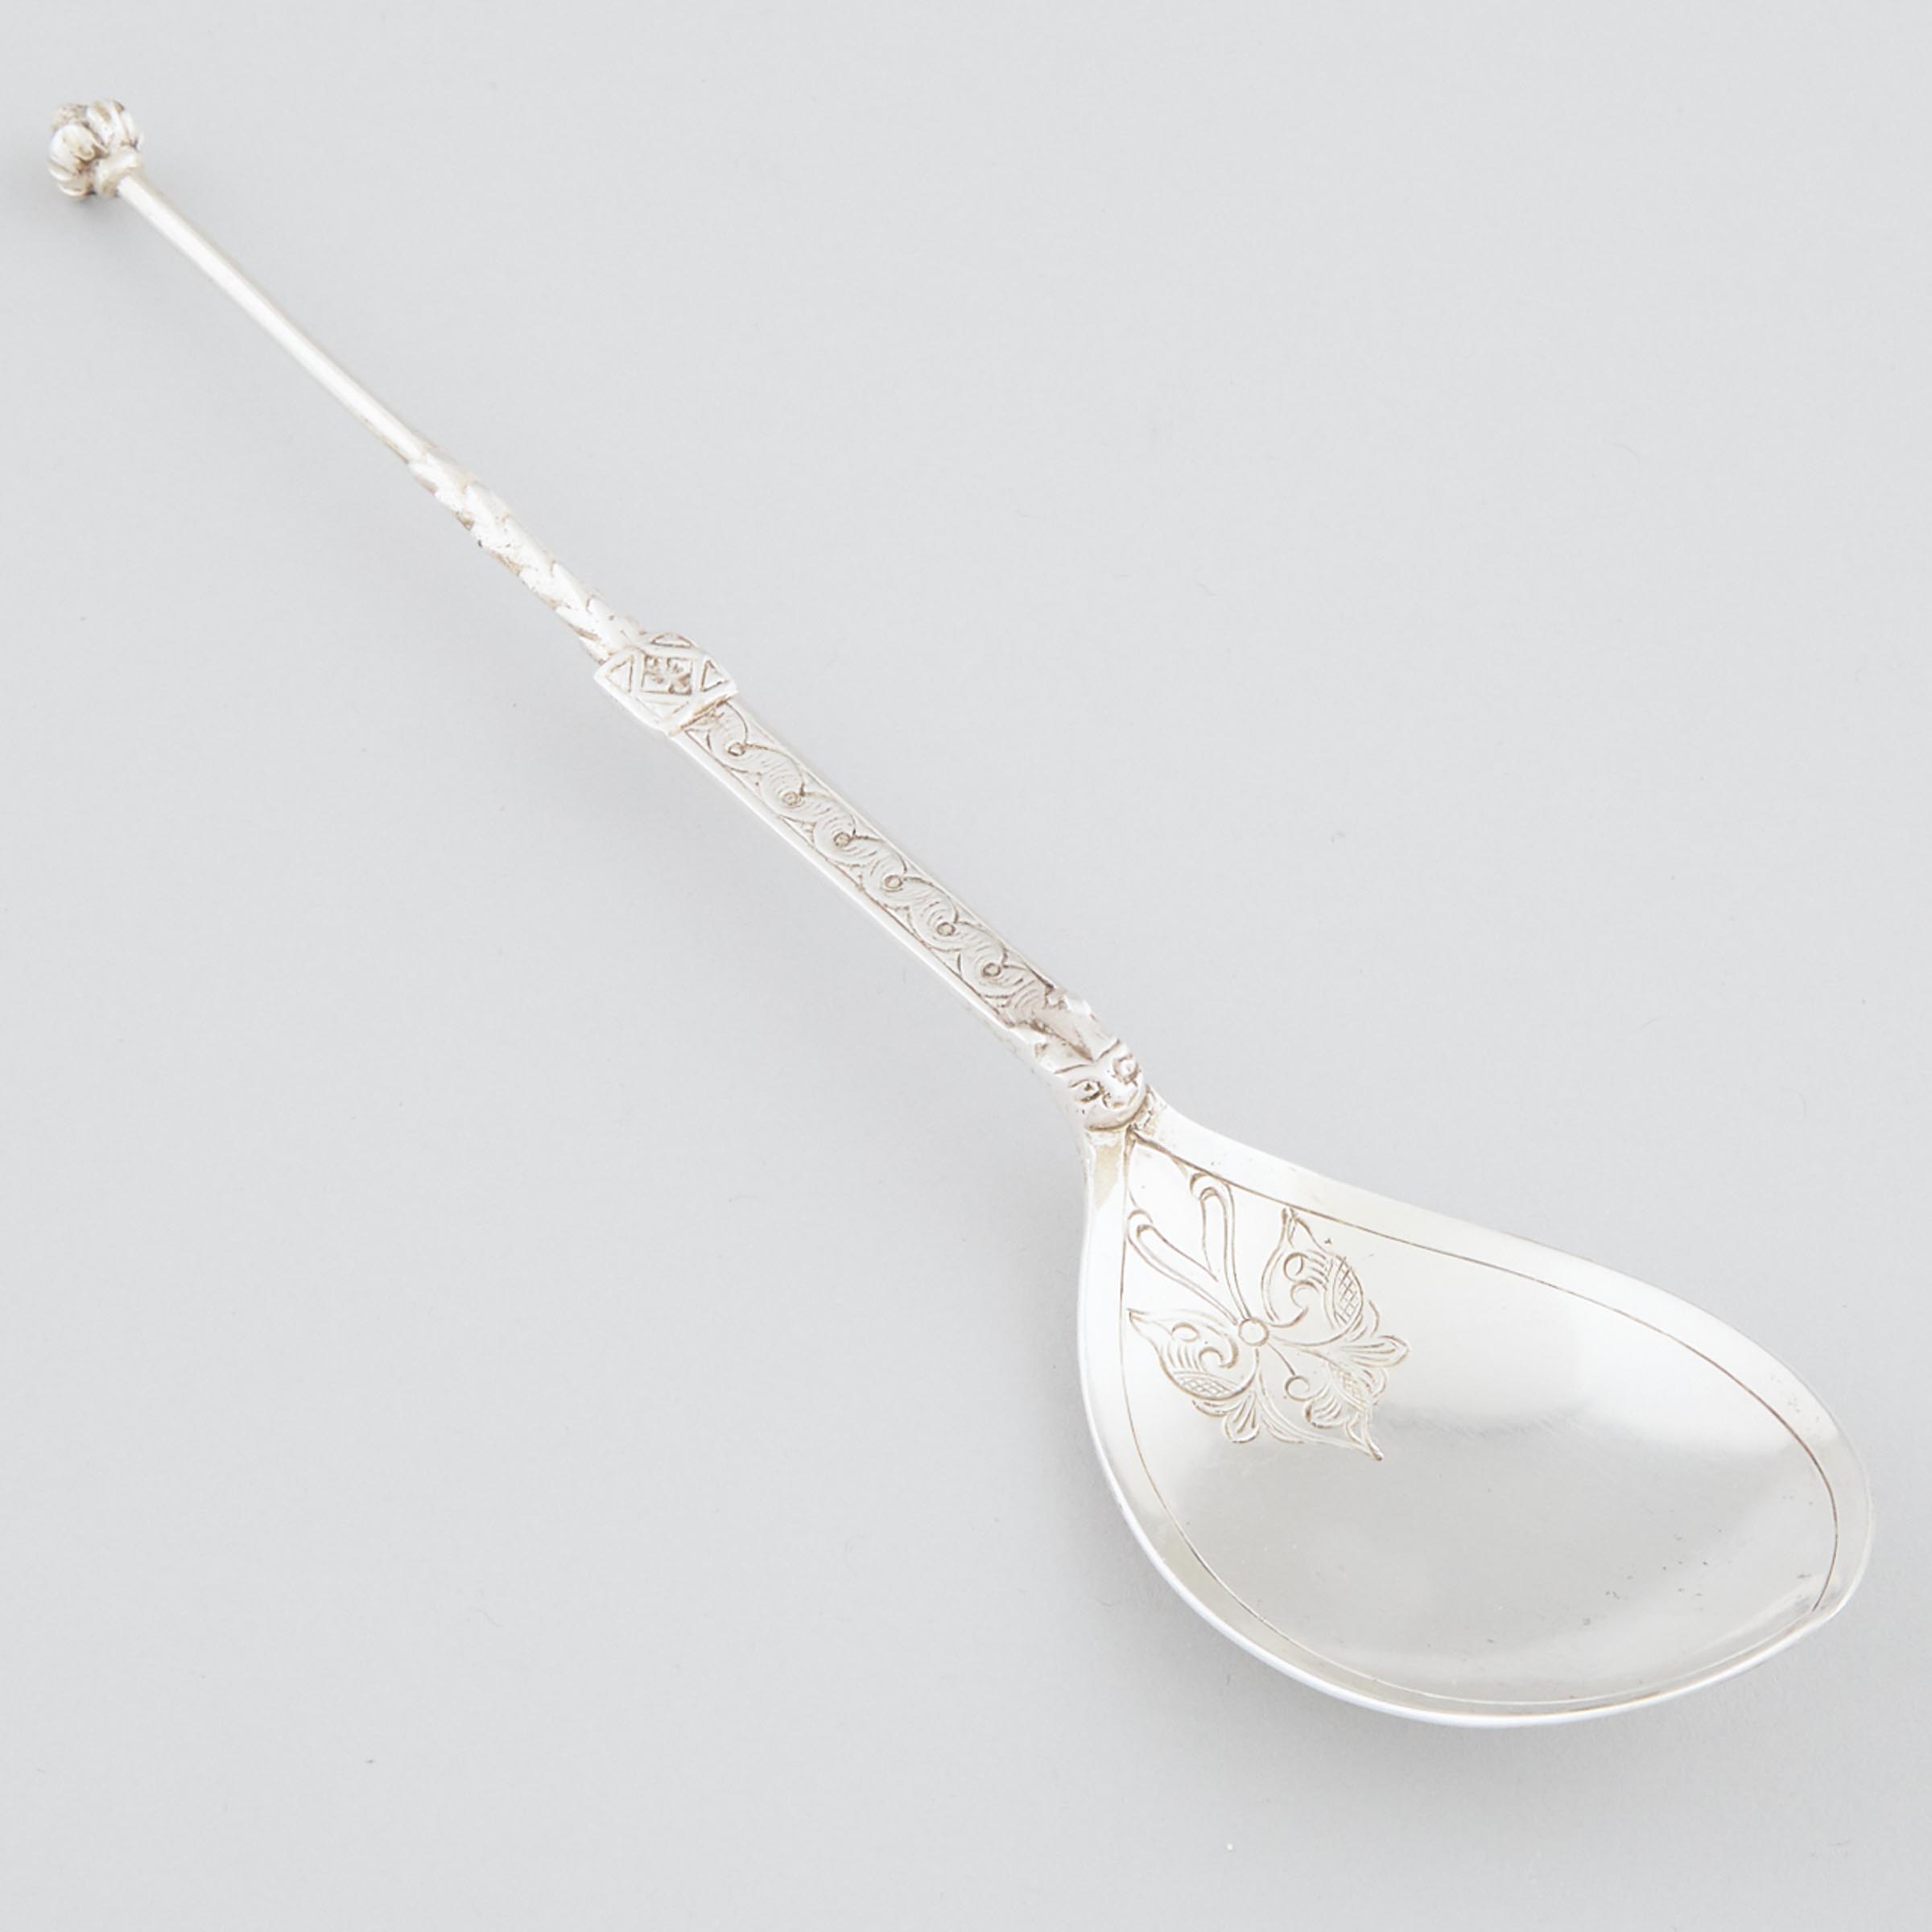 English Silver Celtic 'Iona' Spoon, Alexander Ritchie for Walter Latham & Son, Sheffield, 1923